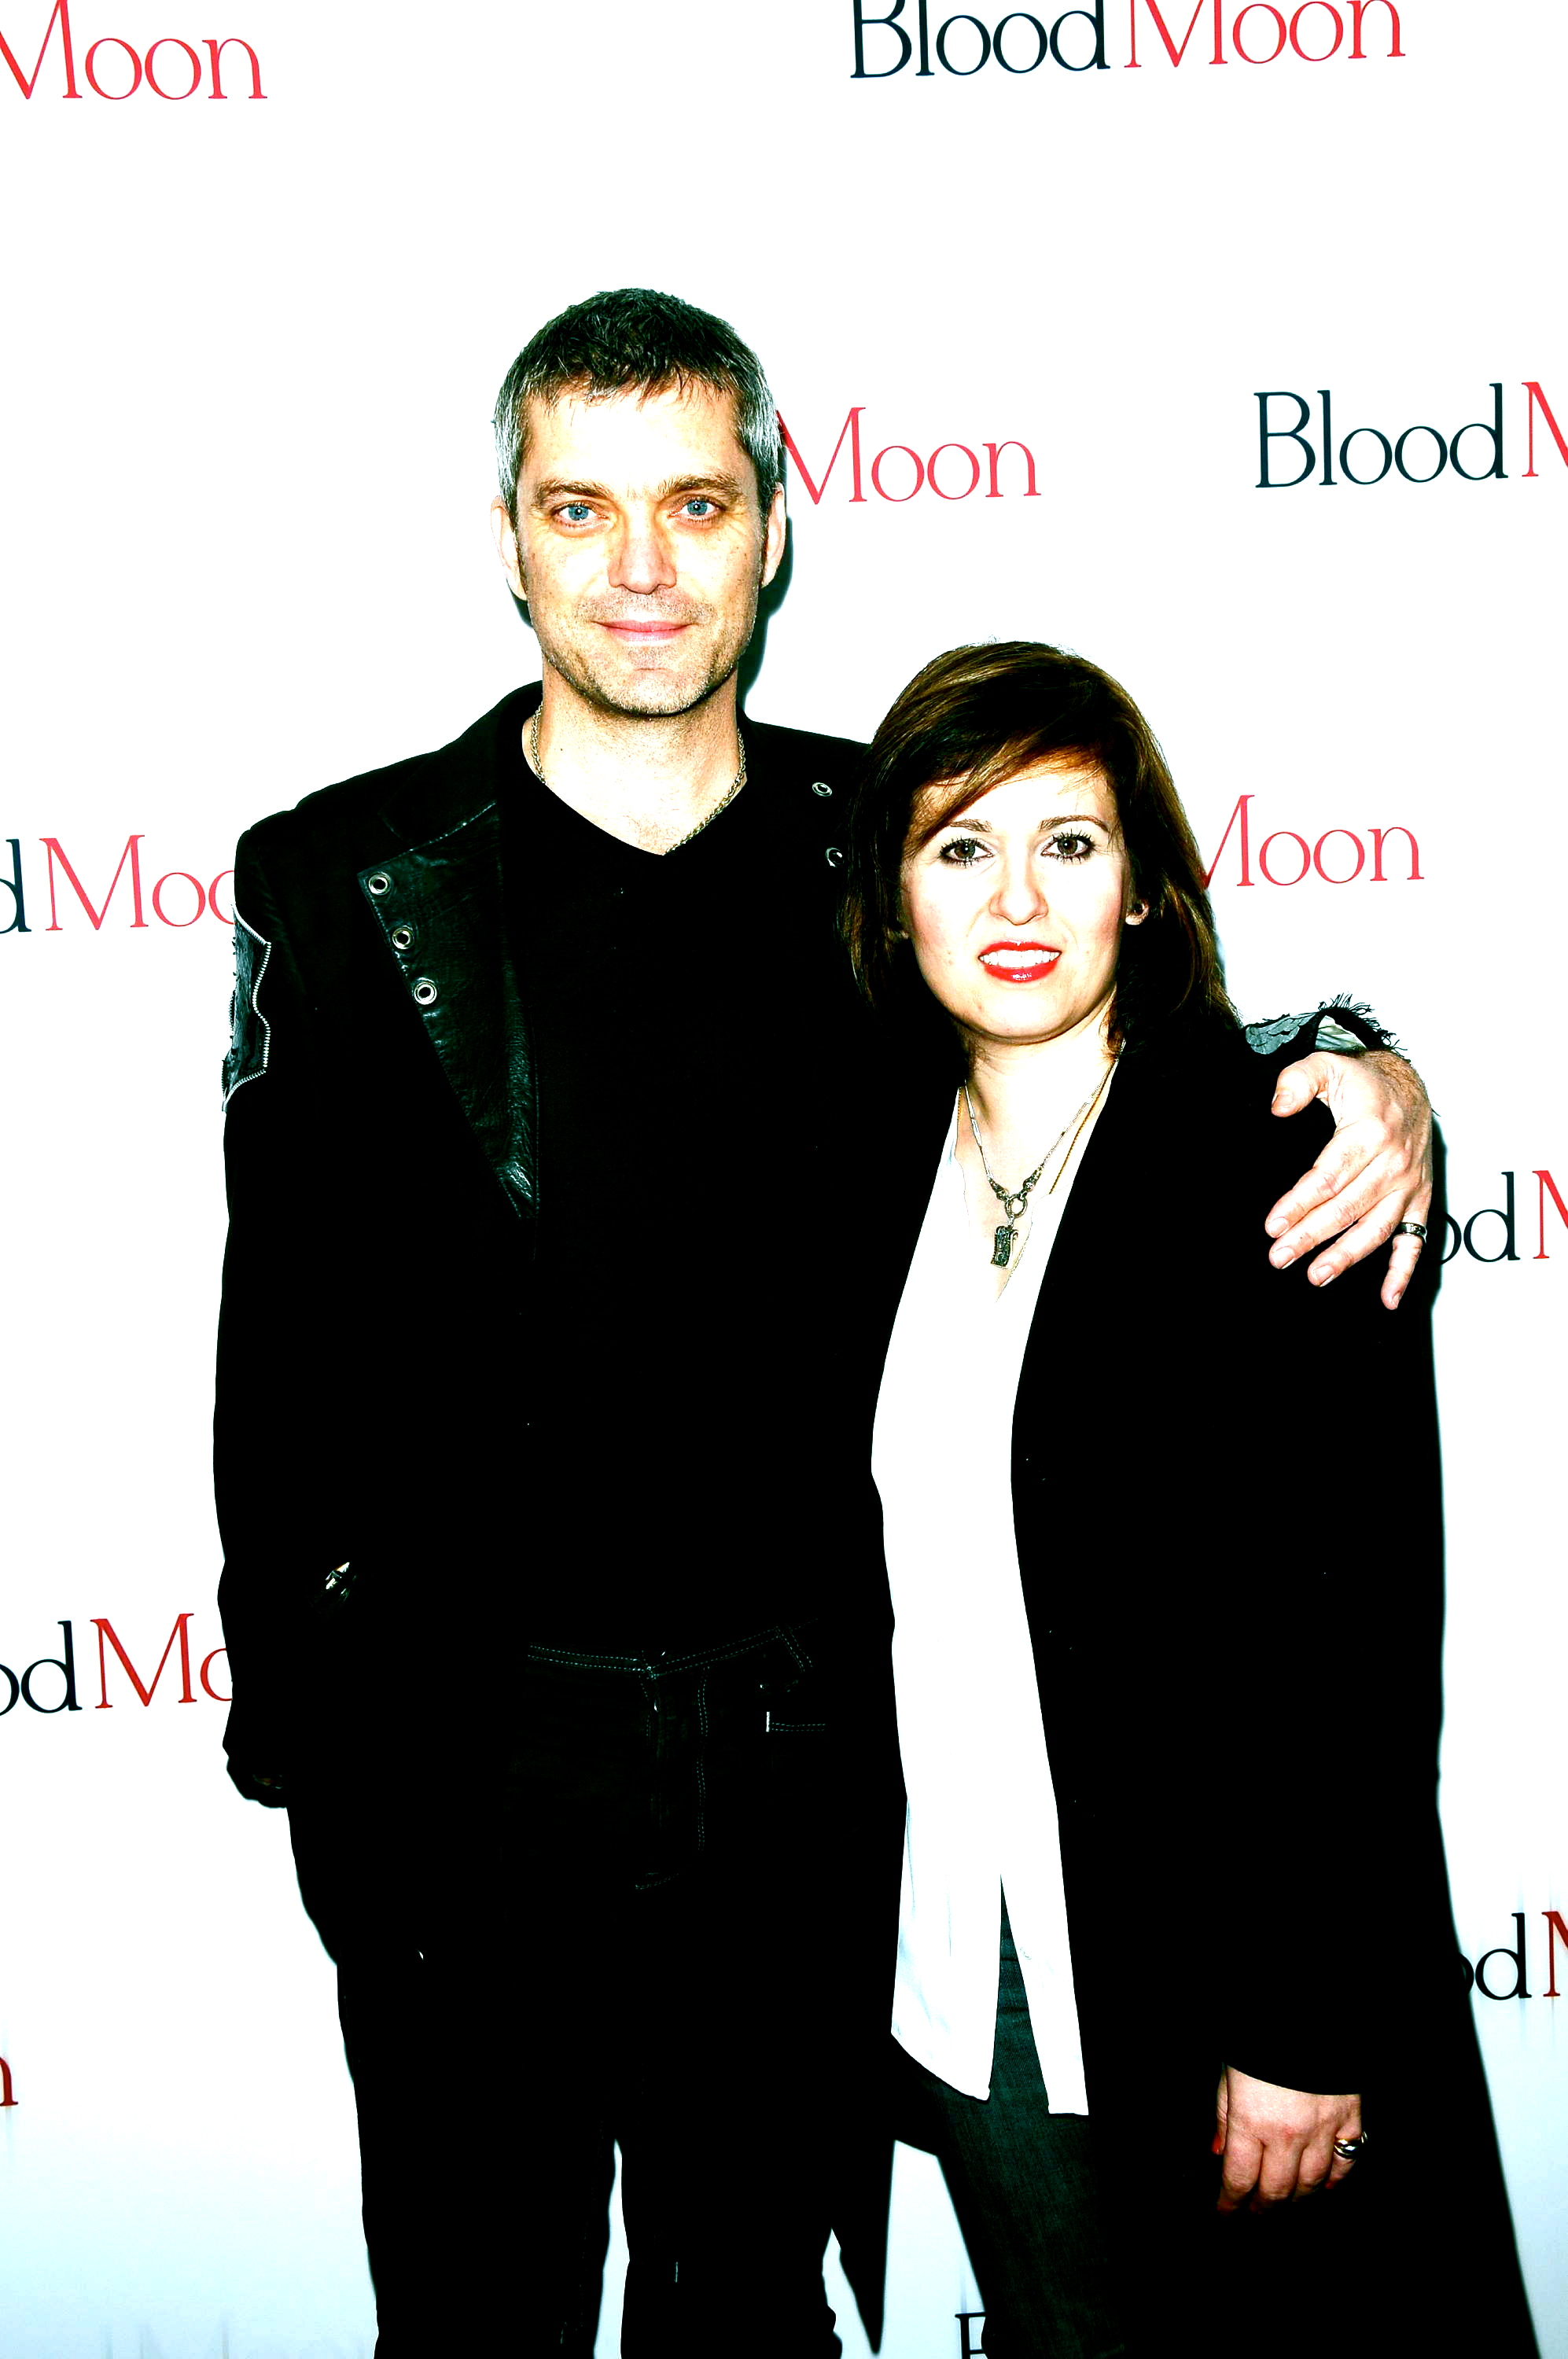 BLOOD MOON premier at Sony Pictures Studios, 2012.